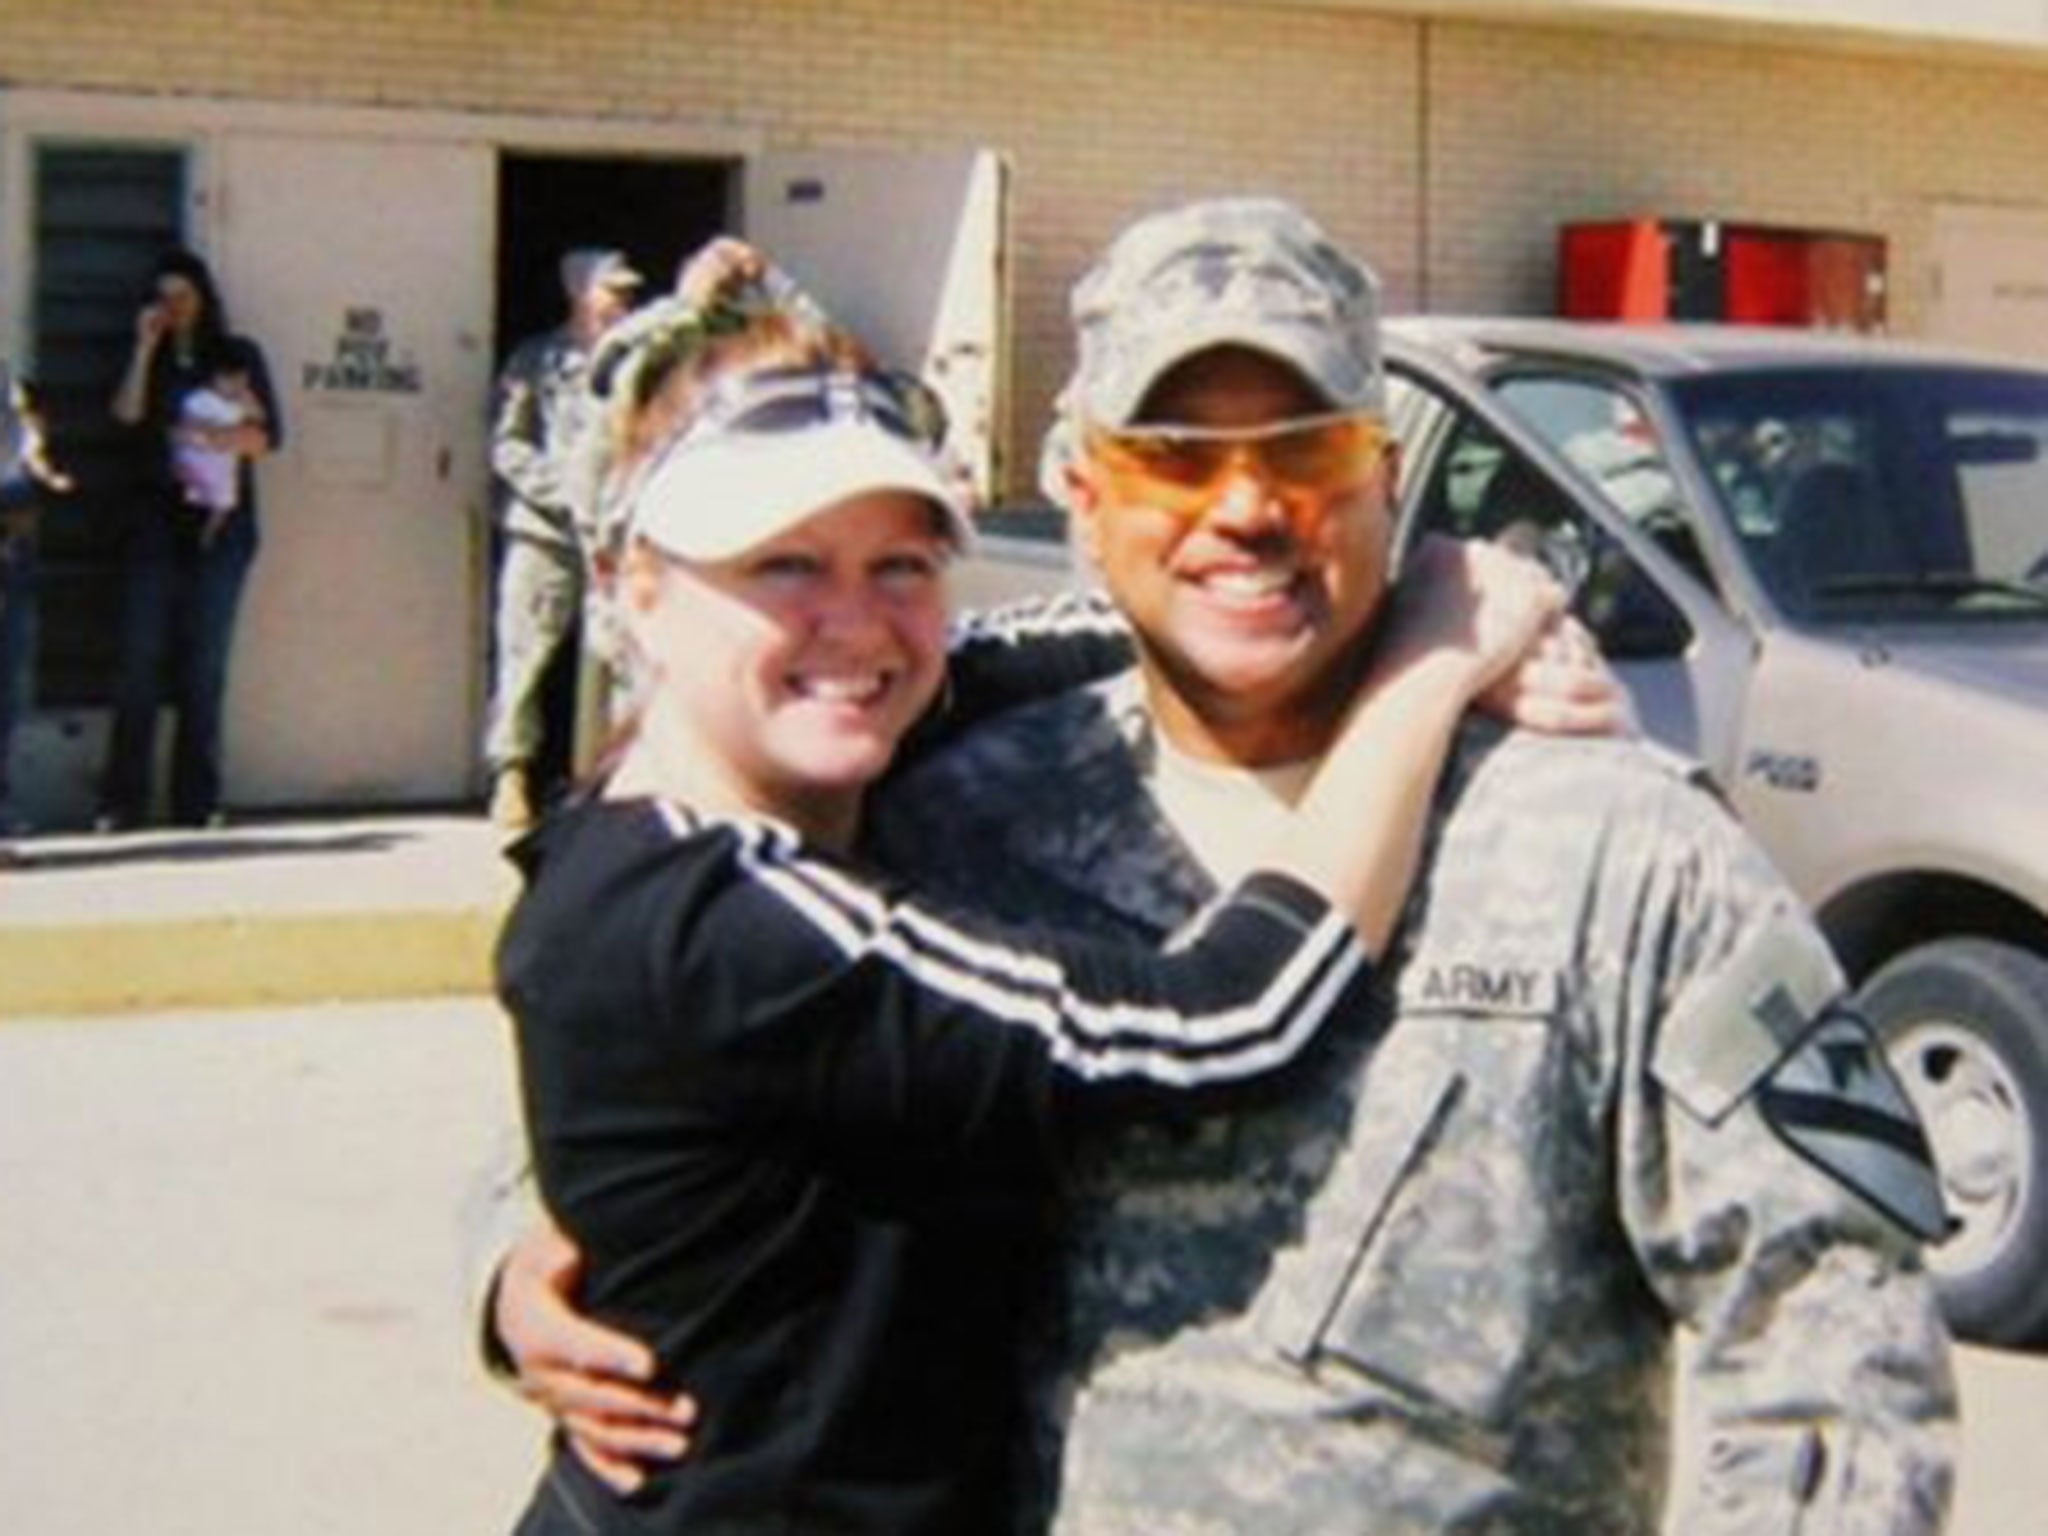 Omar Gonzalez poses for a photo in his Army uniform with his former wife Samantha, prior to an overseas deployment.